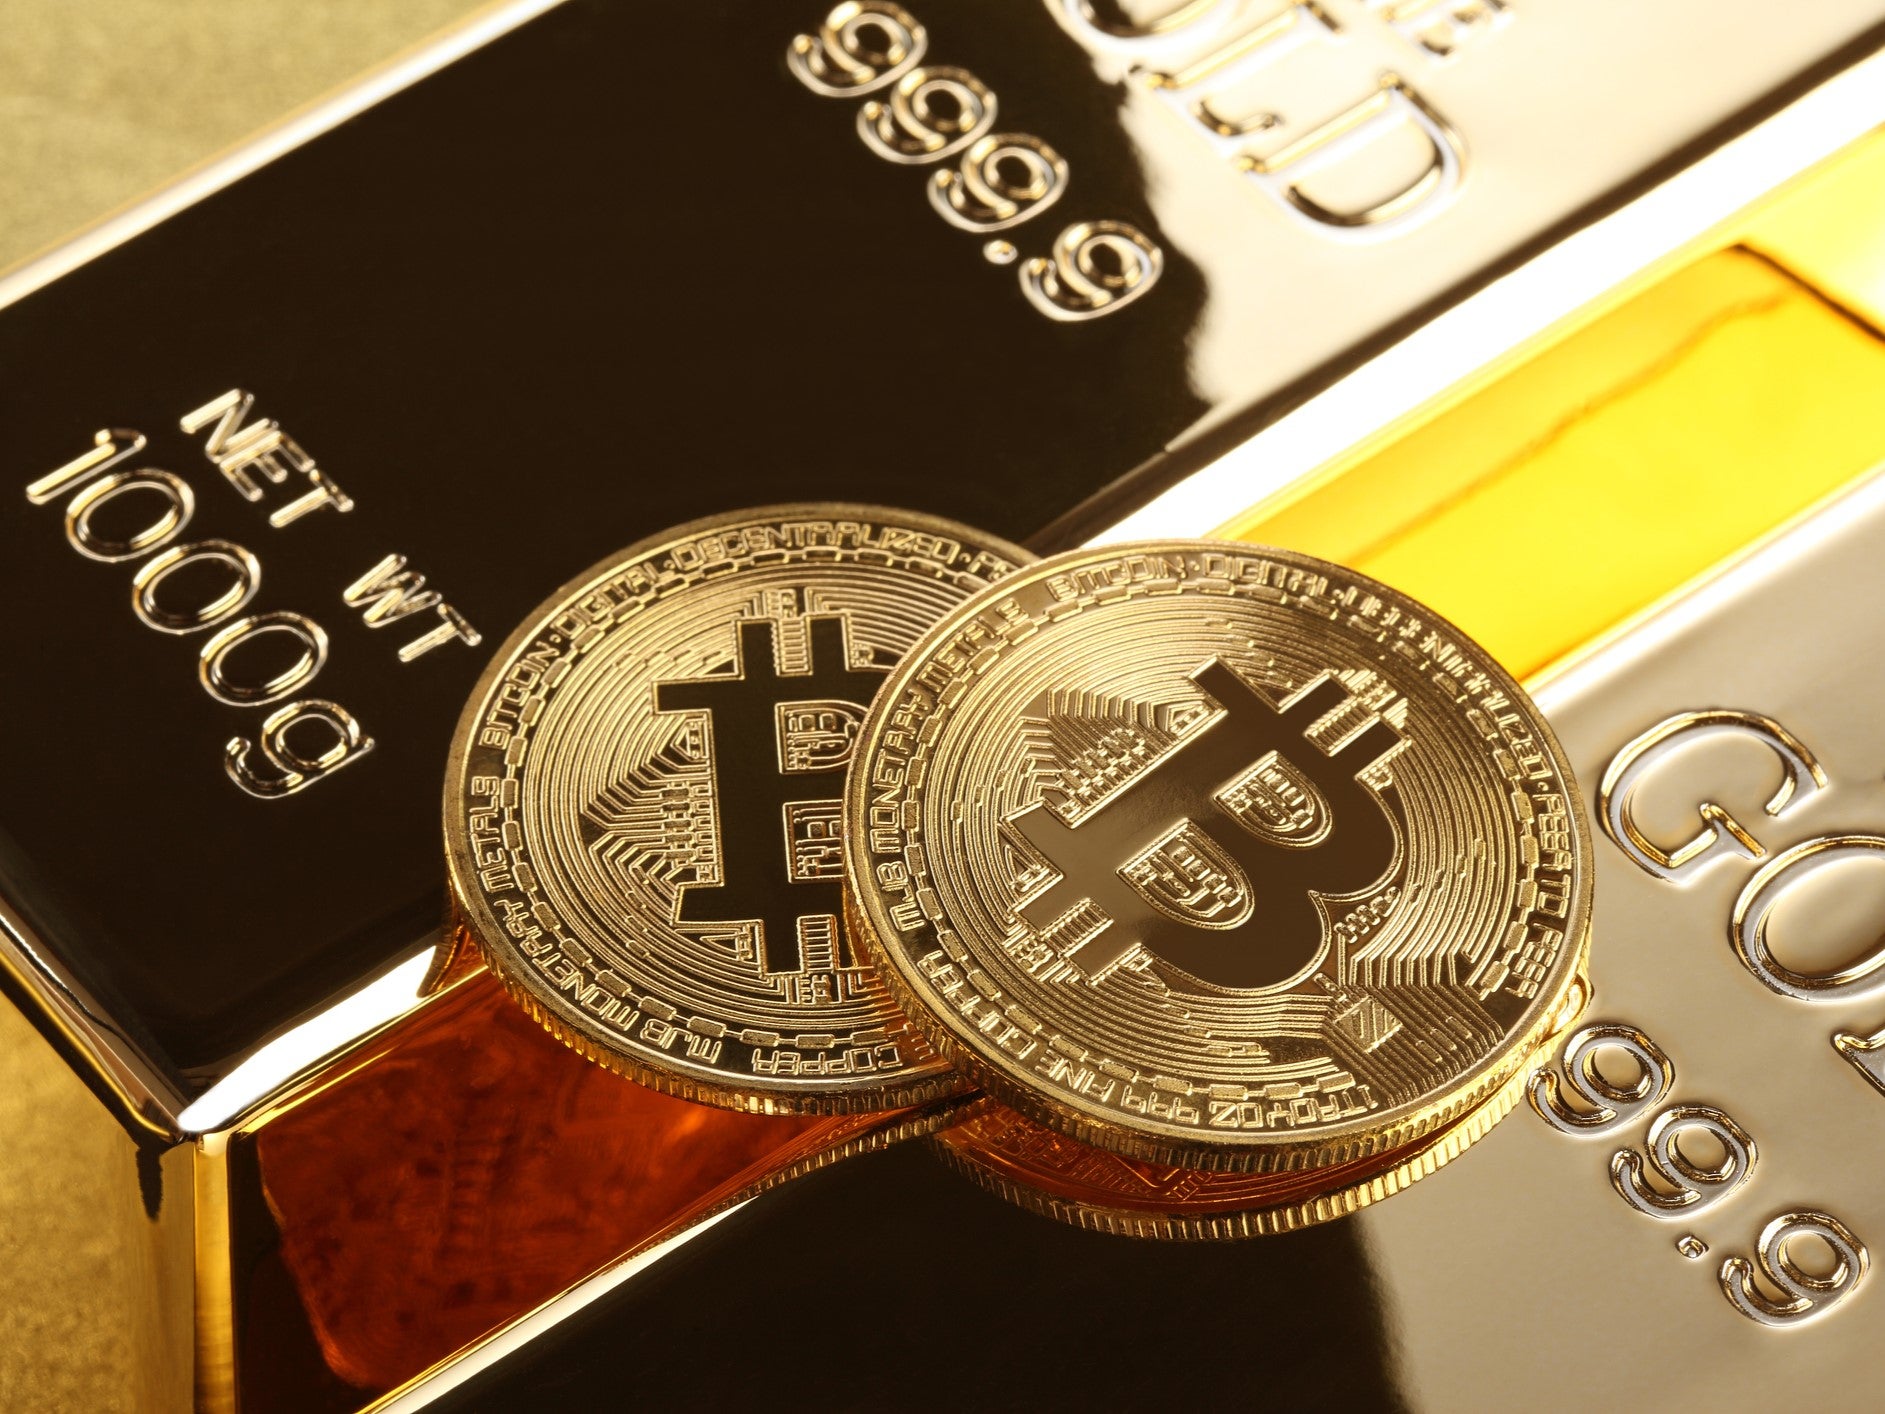 Bitcoin’s scarce supply has led to comparisons with gold and other safe-haven assets